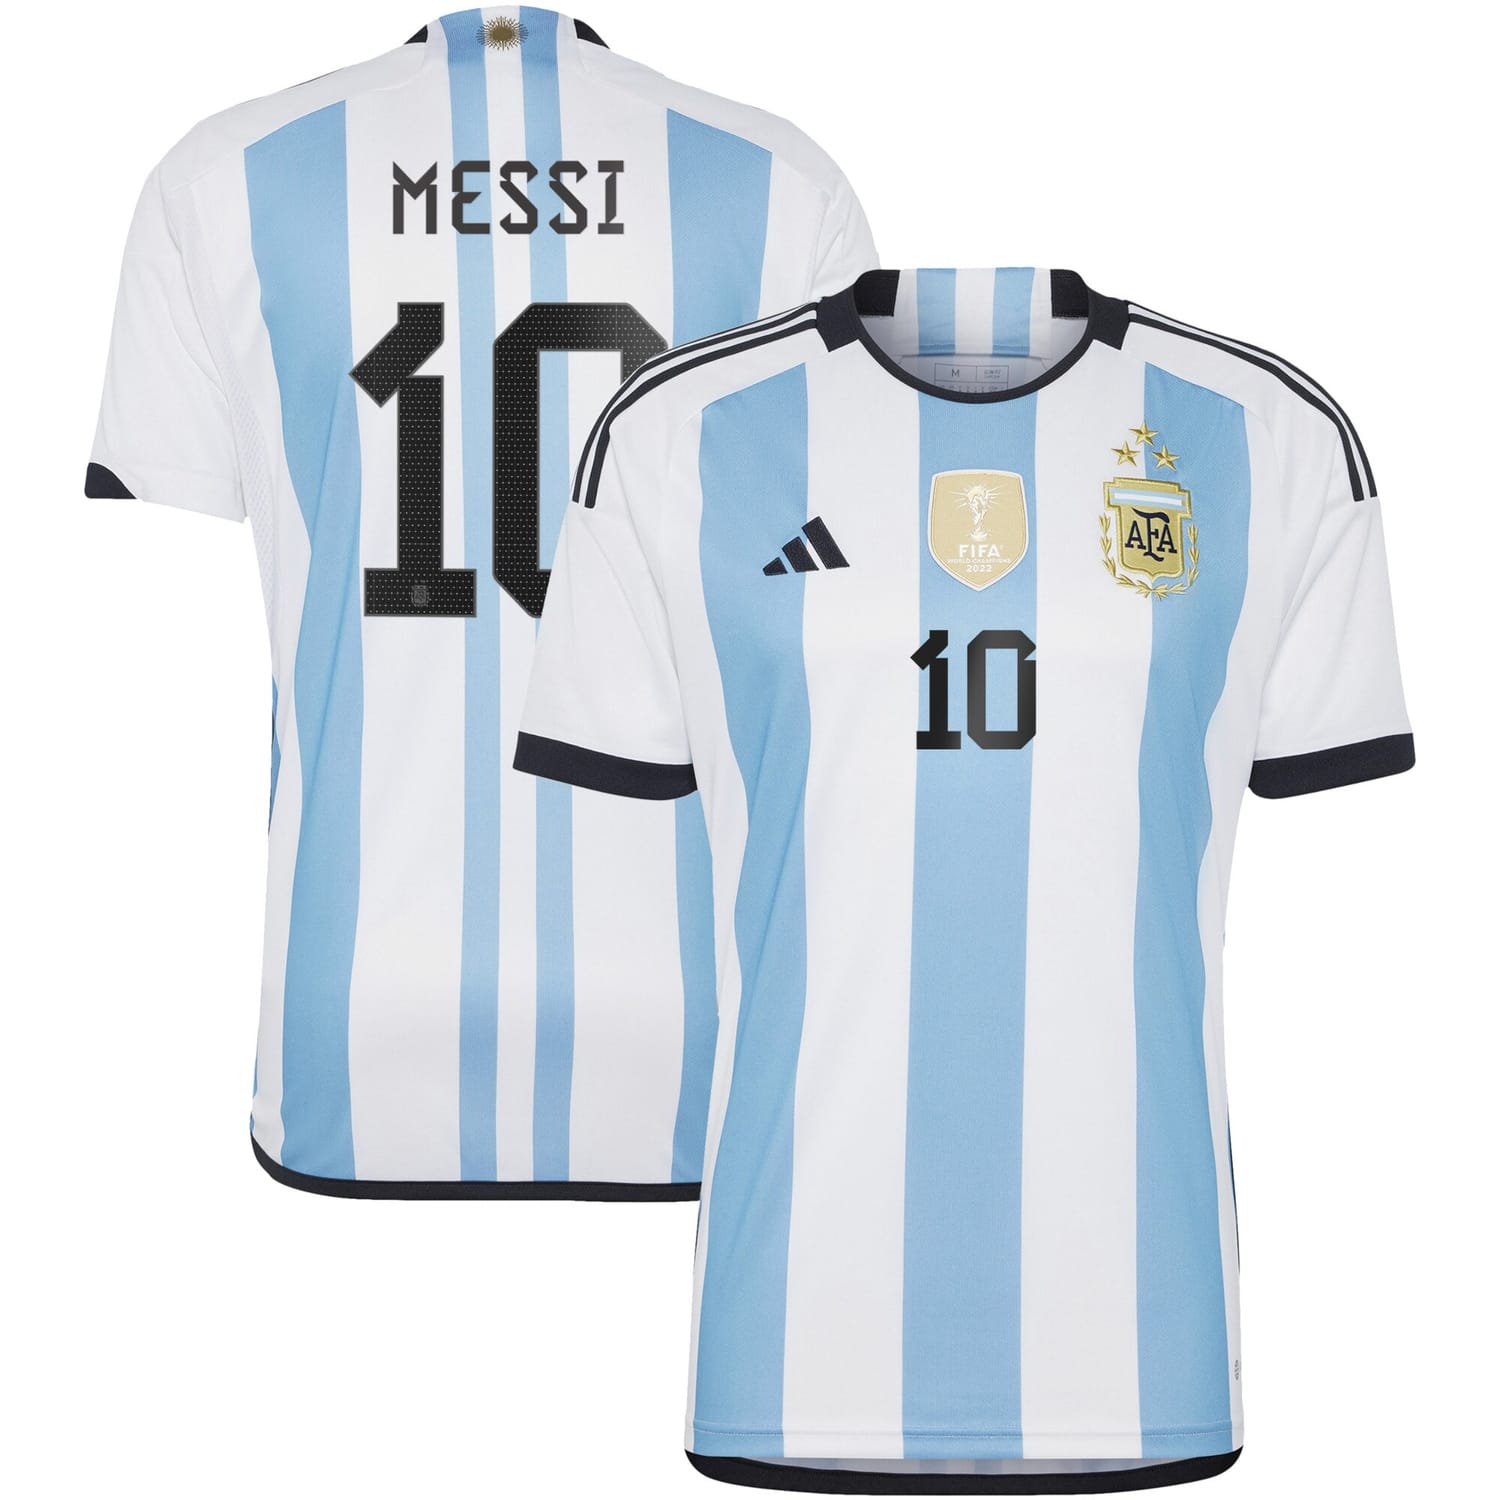 Argentina National Team Home Jersey Shirt 2023 player Lionel Messi 10 printing for Men